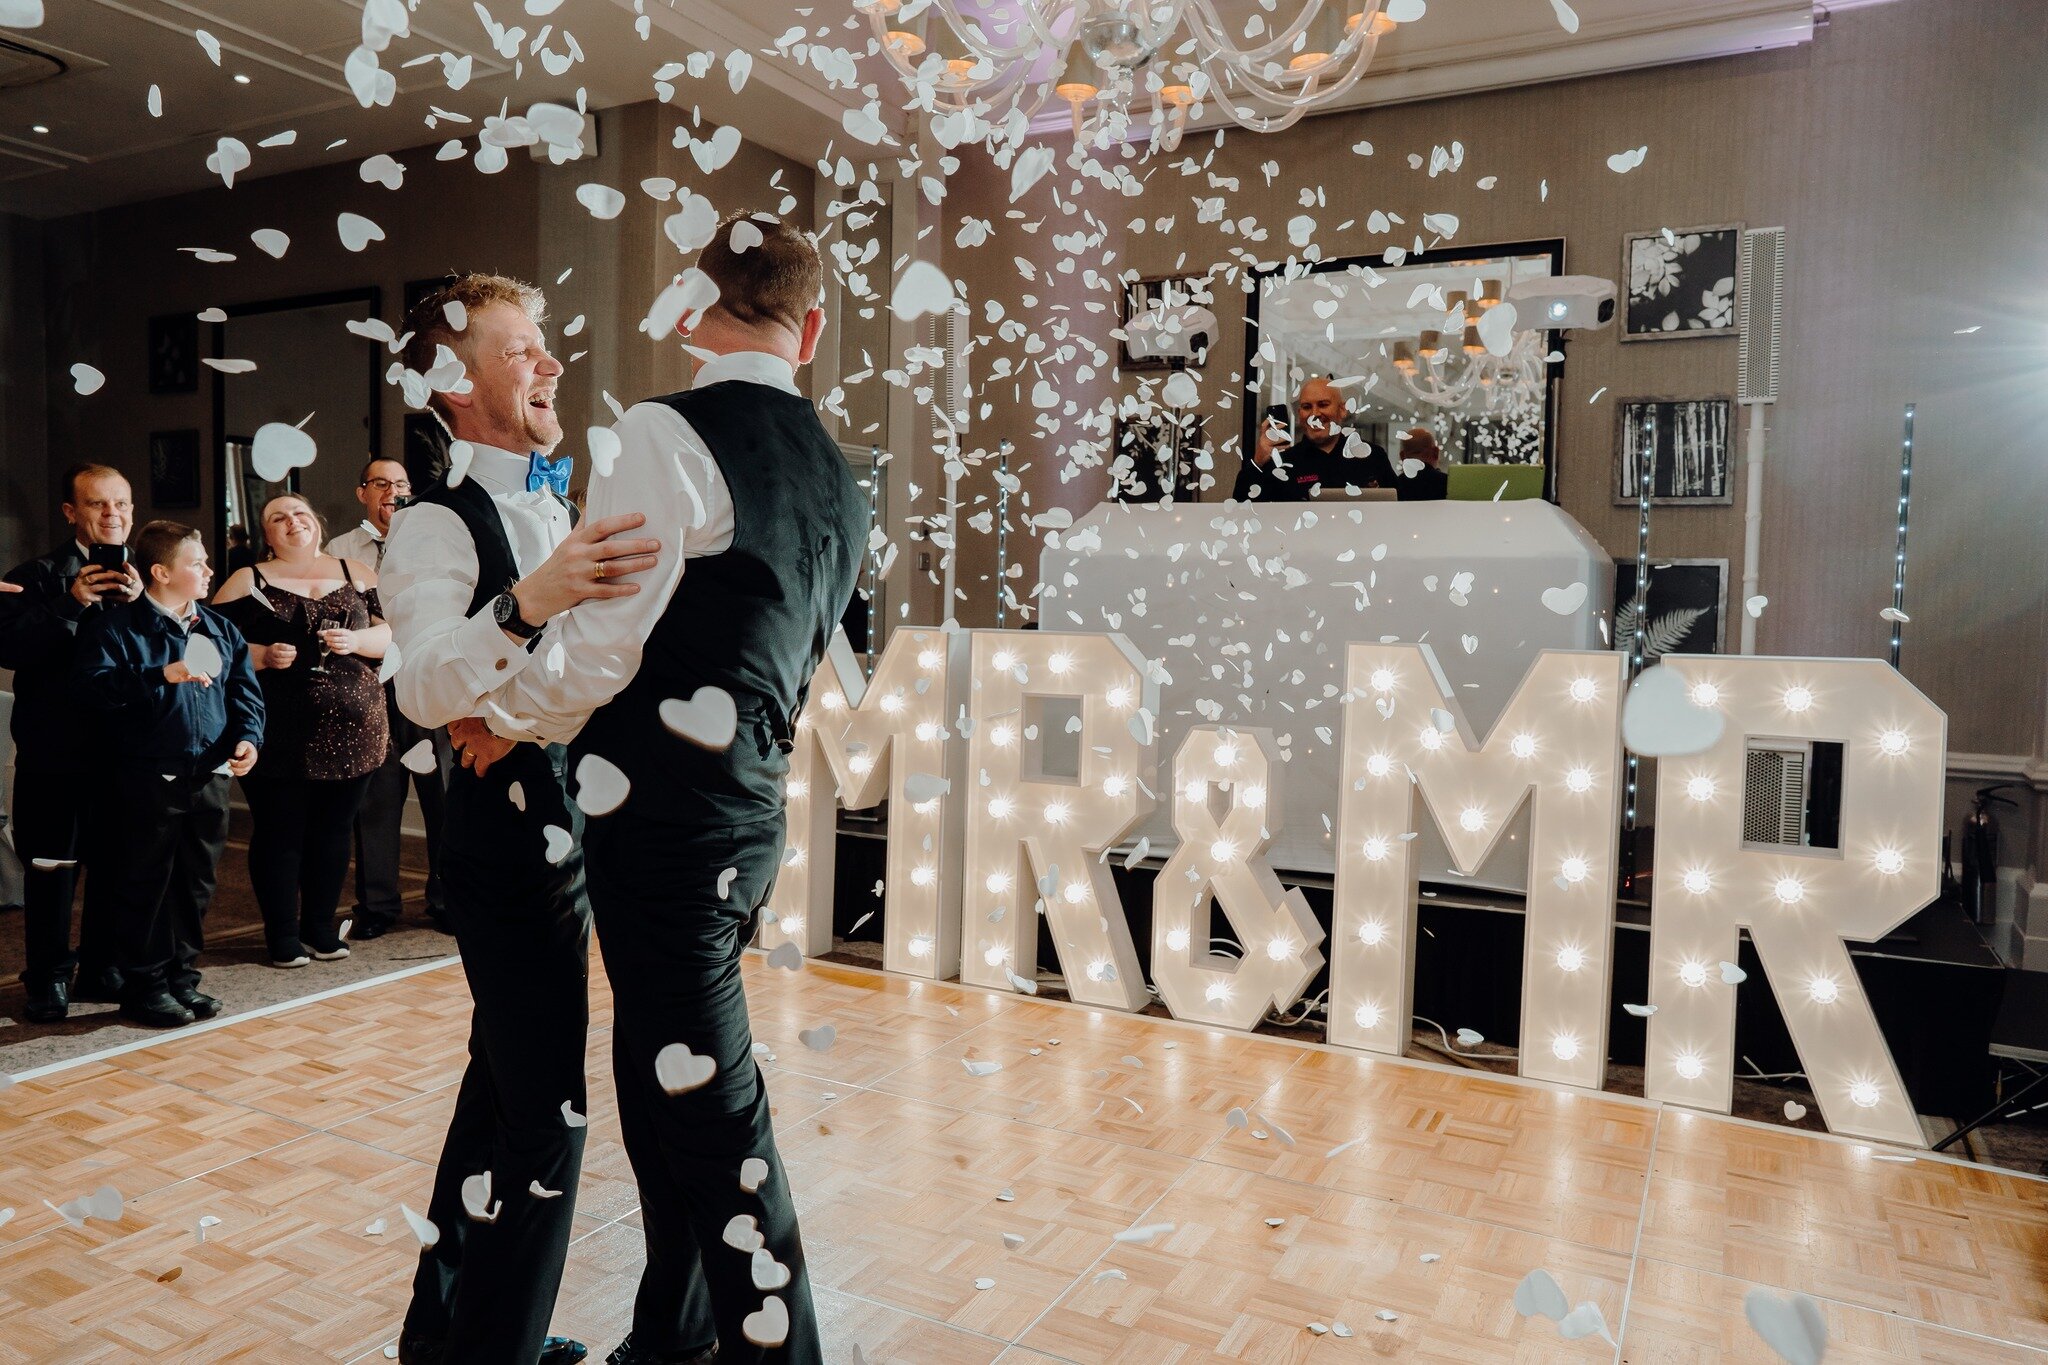 Love is in the air at @rhillhotel ❤️❤️

@djleerussell 
@roseblossomevents 

#surrey #surreyweddingphotography #surreywedding #richmondhillhotel #richmond